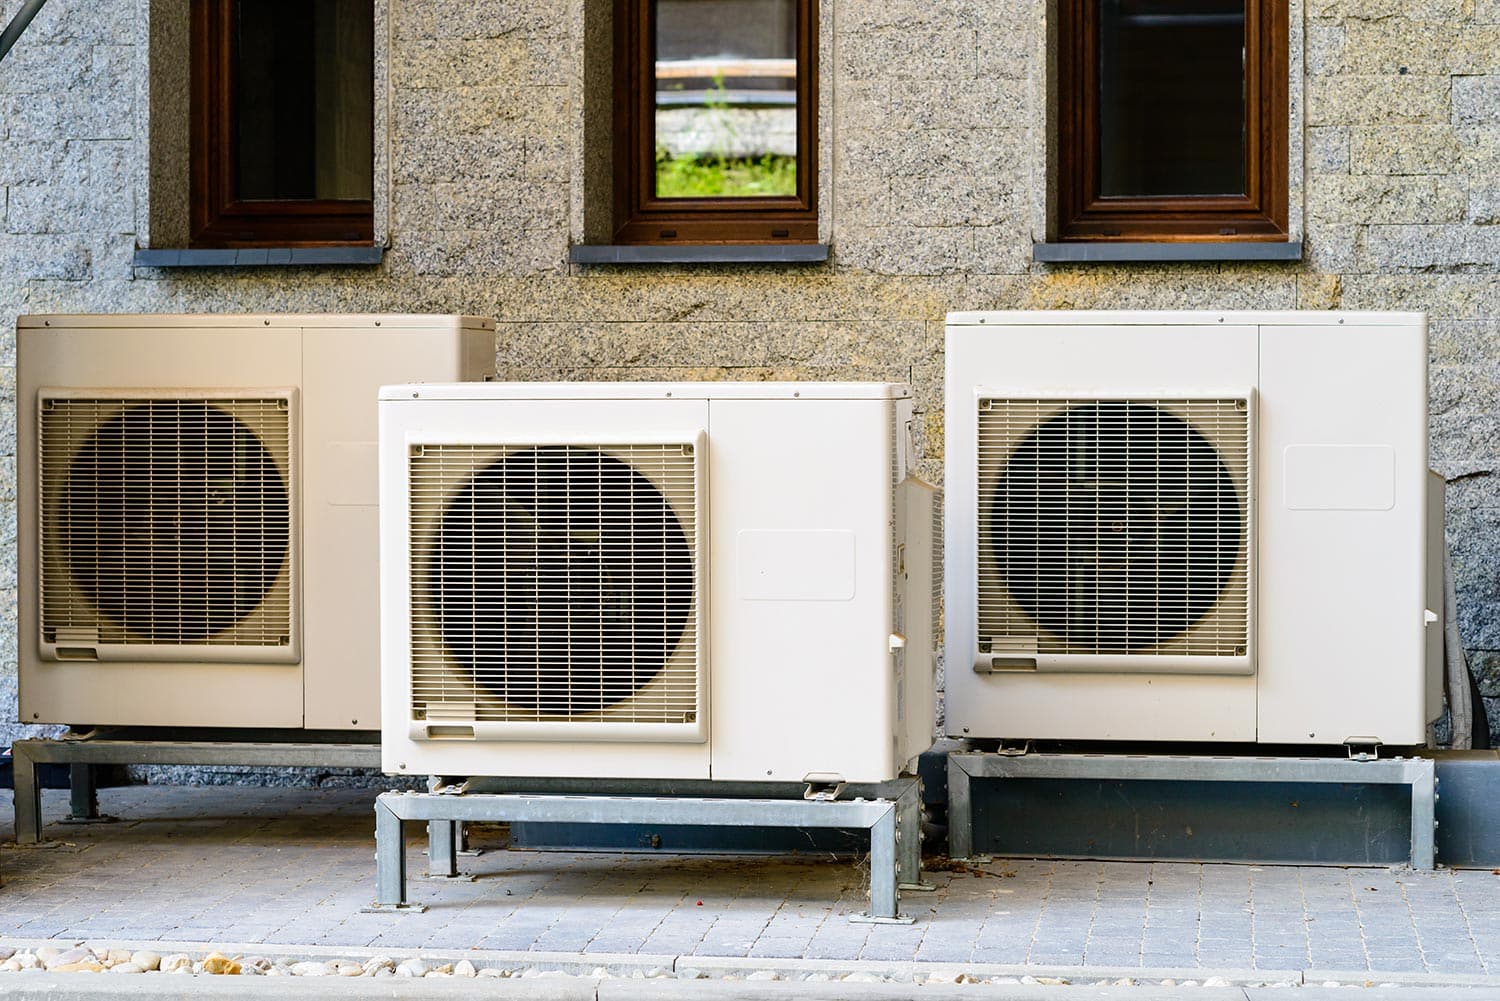 Air conditioning system assembled on side of a building